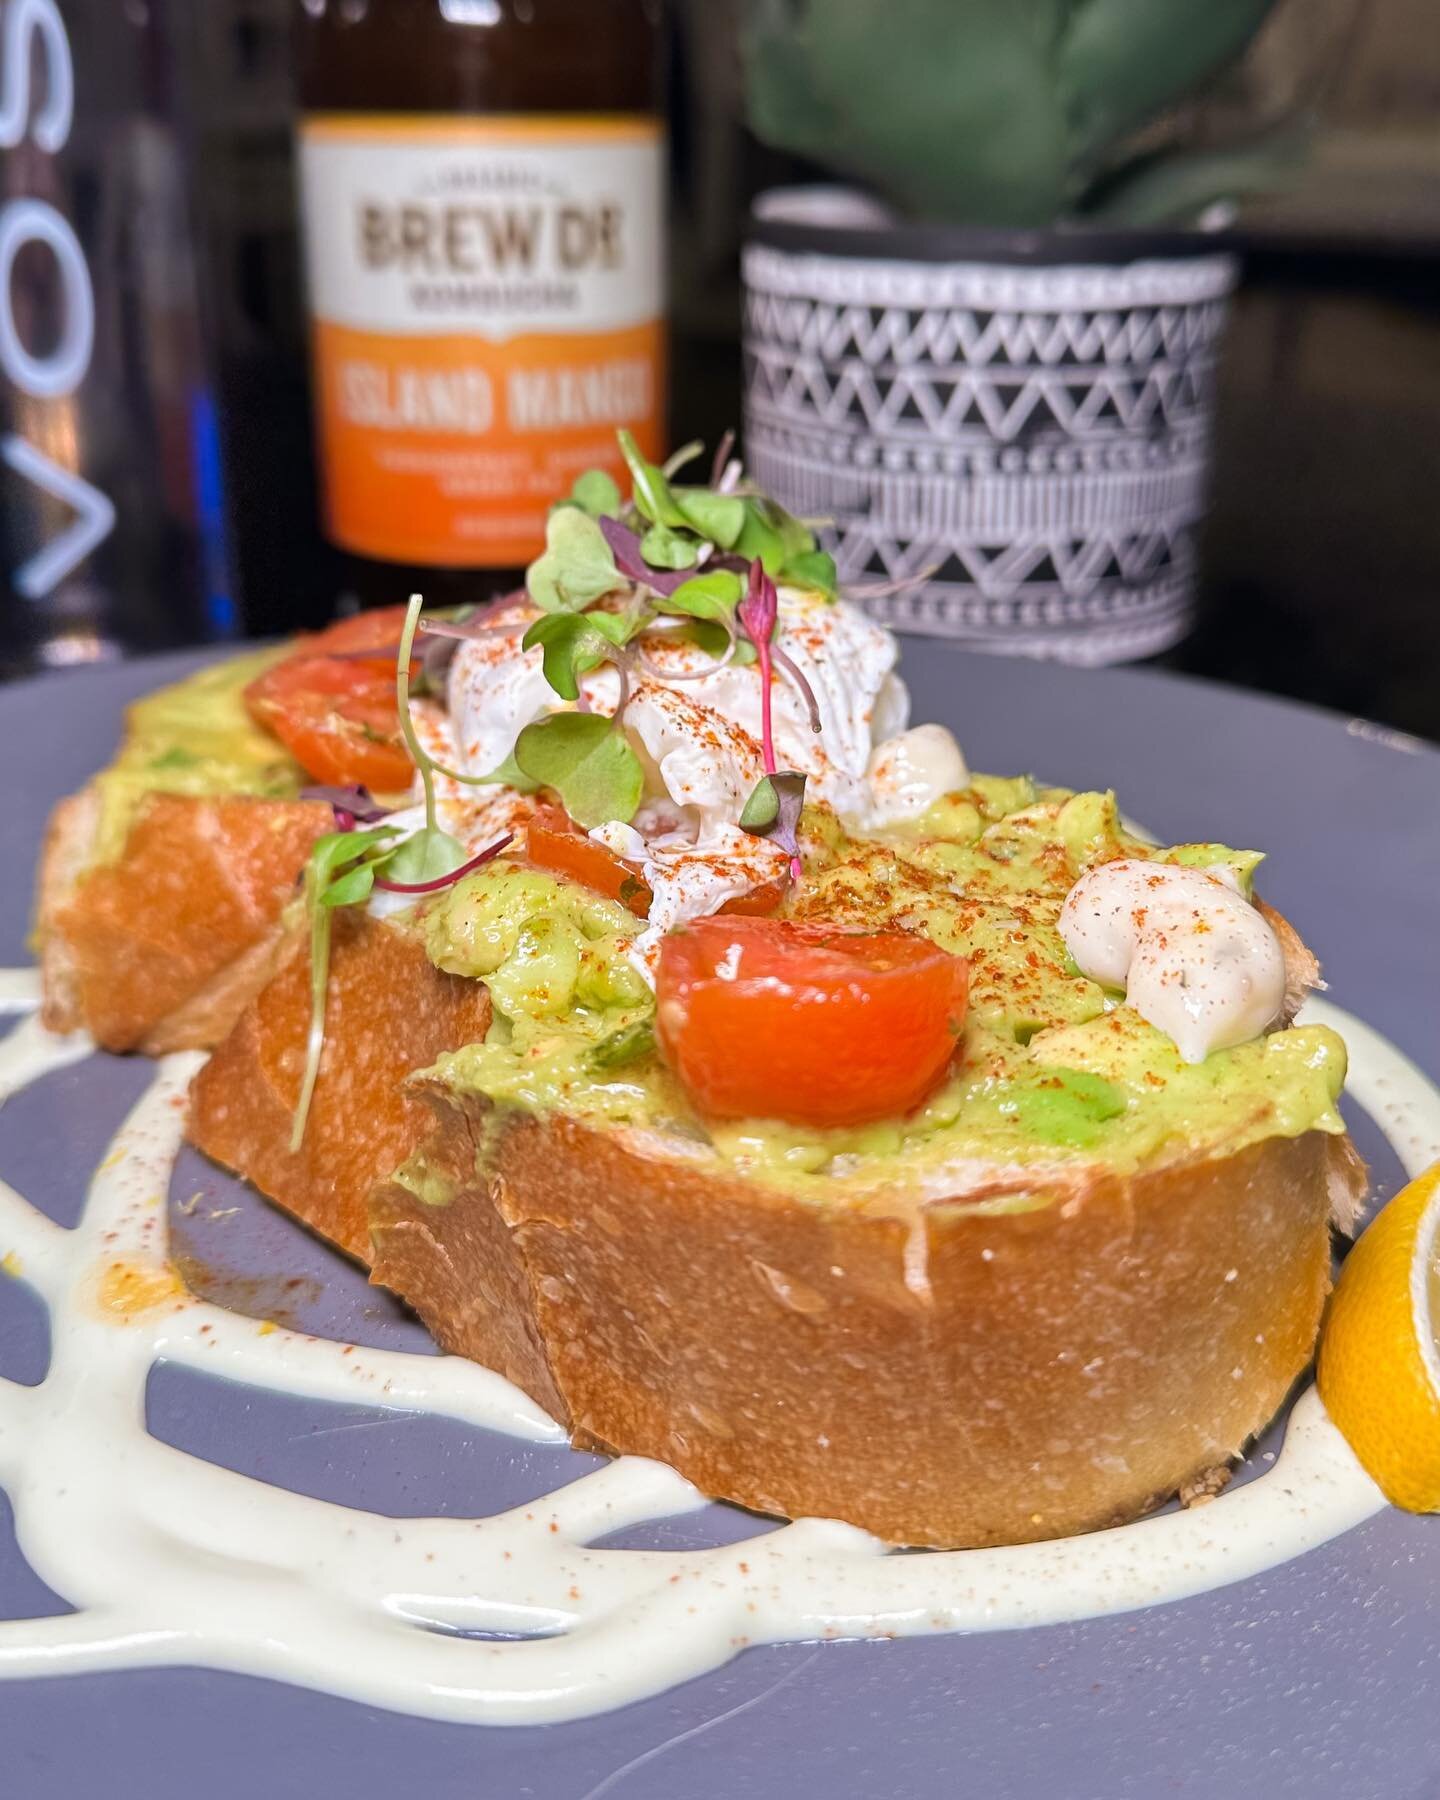 Say good morning with some avocado toast🥑

➖➖➖➖➖➖➖➖➖➖➖➖
Downtown LV
📍 1120 S Main St Suite 110
Downtown Summerlin
📍 2120 Festival Plaza Dr Unit 140
 Area 15 
📍 3215 S Rancho Dr
📍 Henderson(Spring 2023)
➖➖➖➖➖➖➖➖➖➖

#MAKERSLV #DTLV #coffeeshop #ve